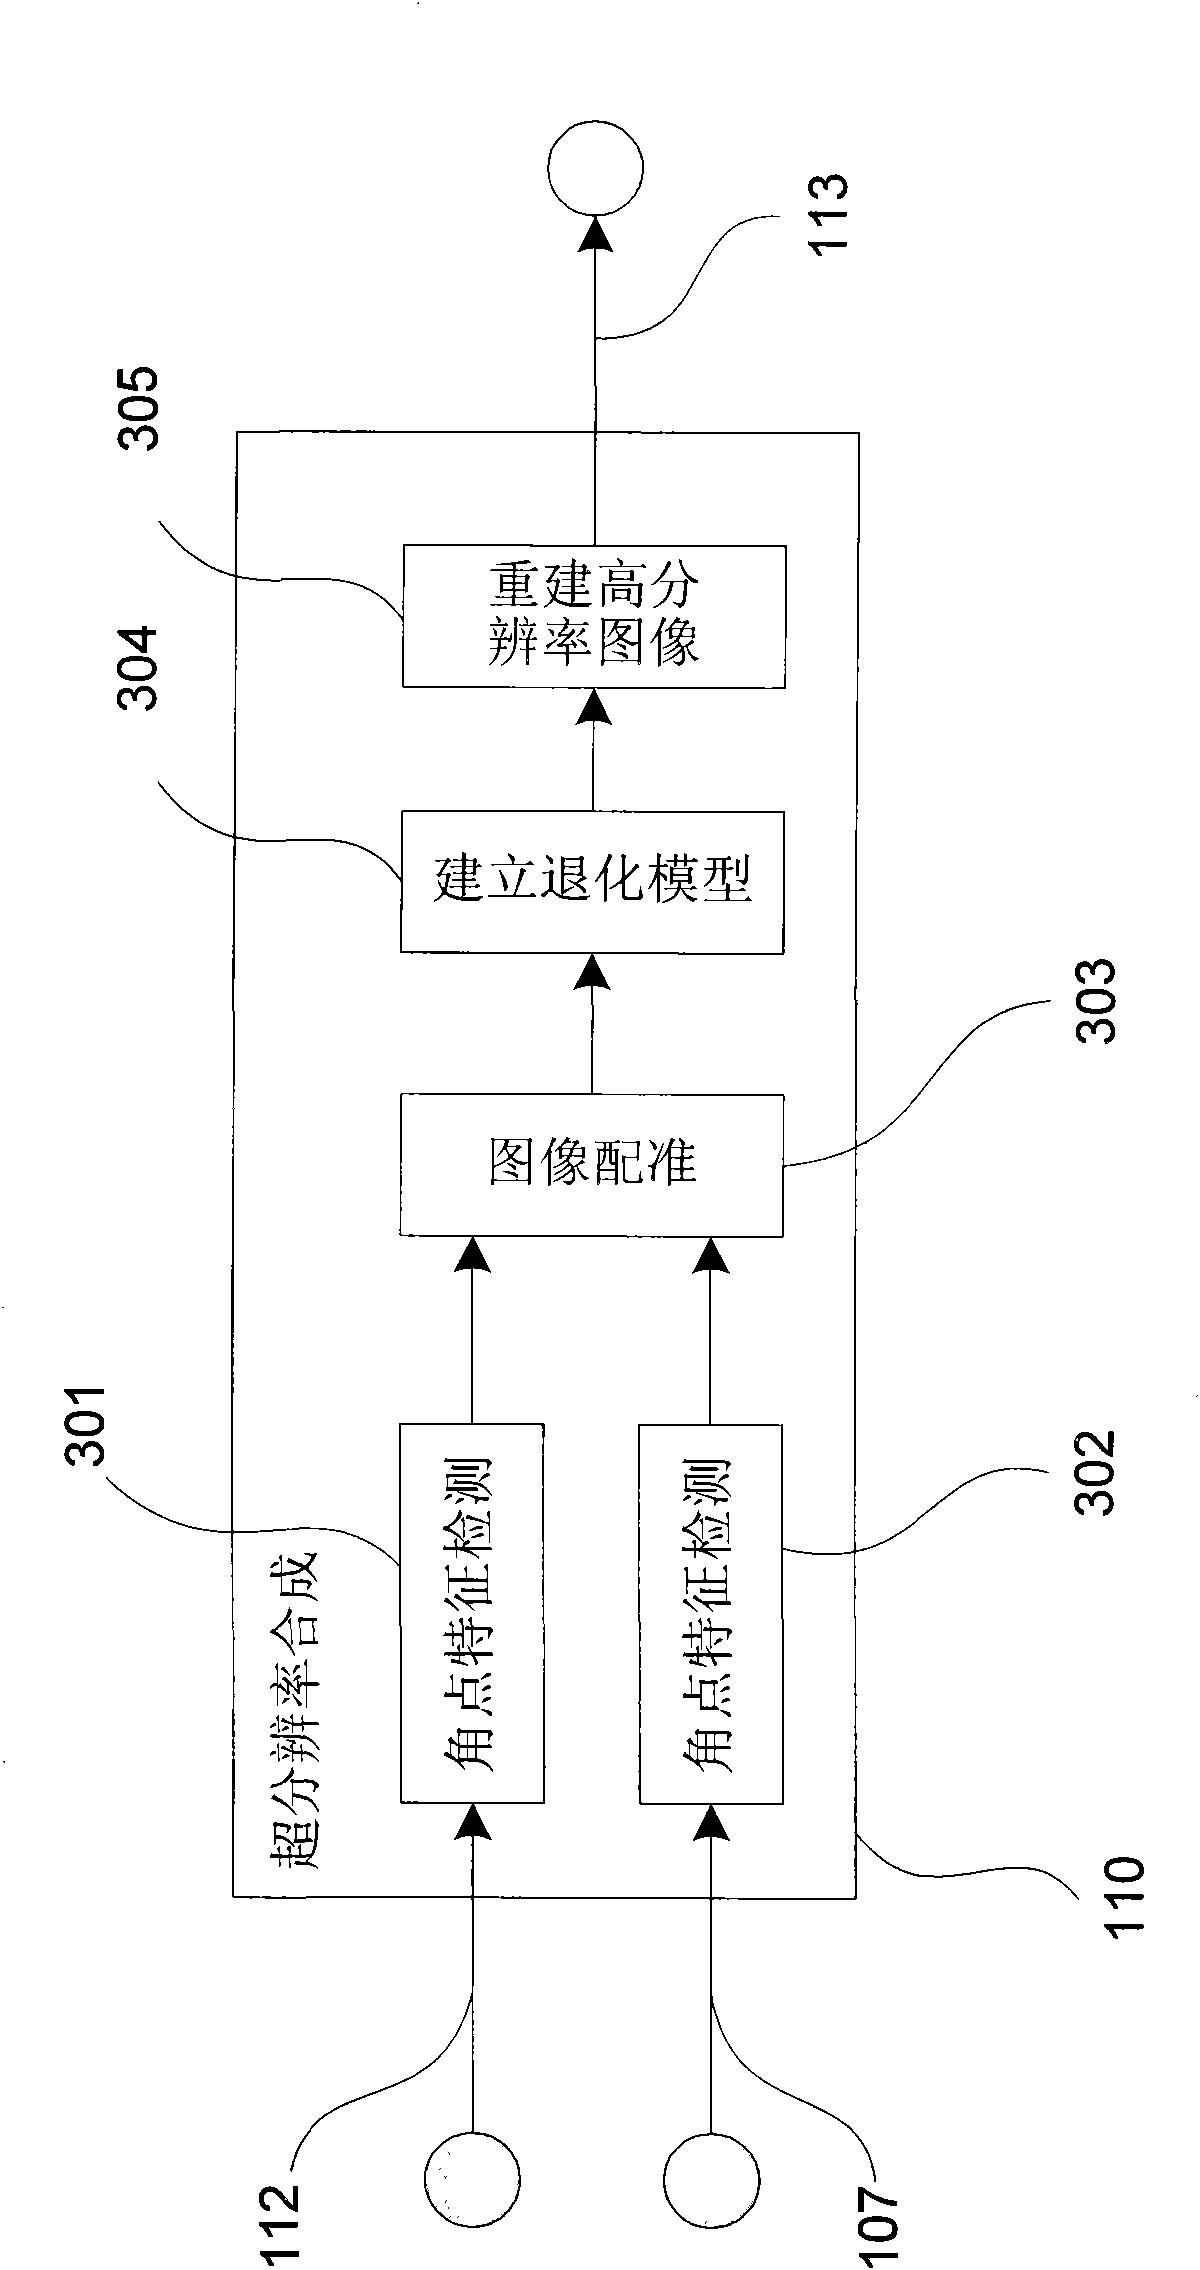 Digital still camera framework for supporting two-channel CMOS (Complementary Metal Oxide Semiconductor) sensor